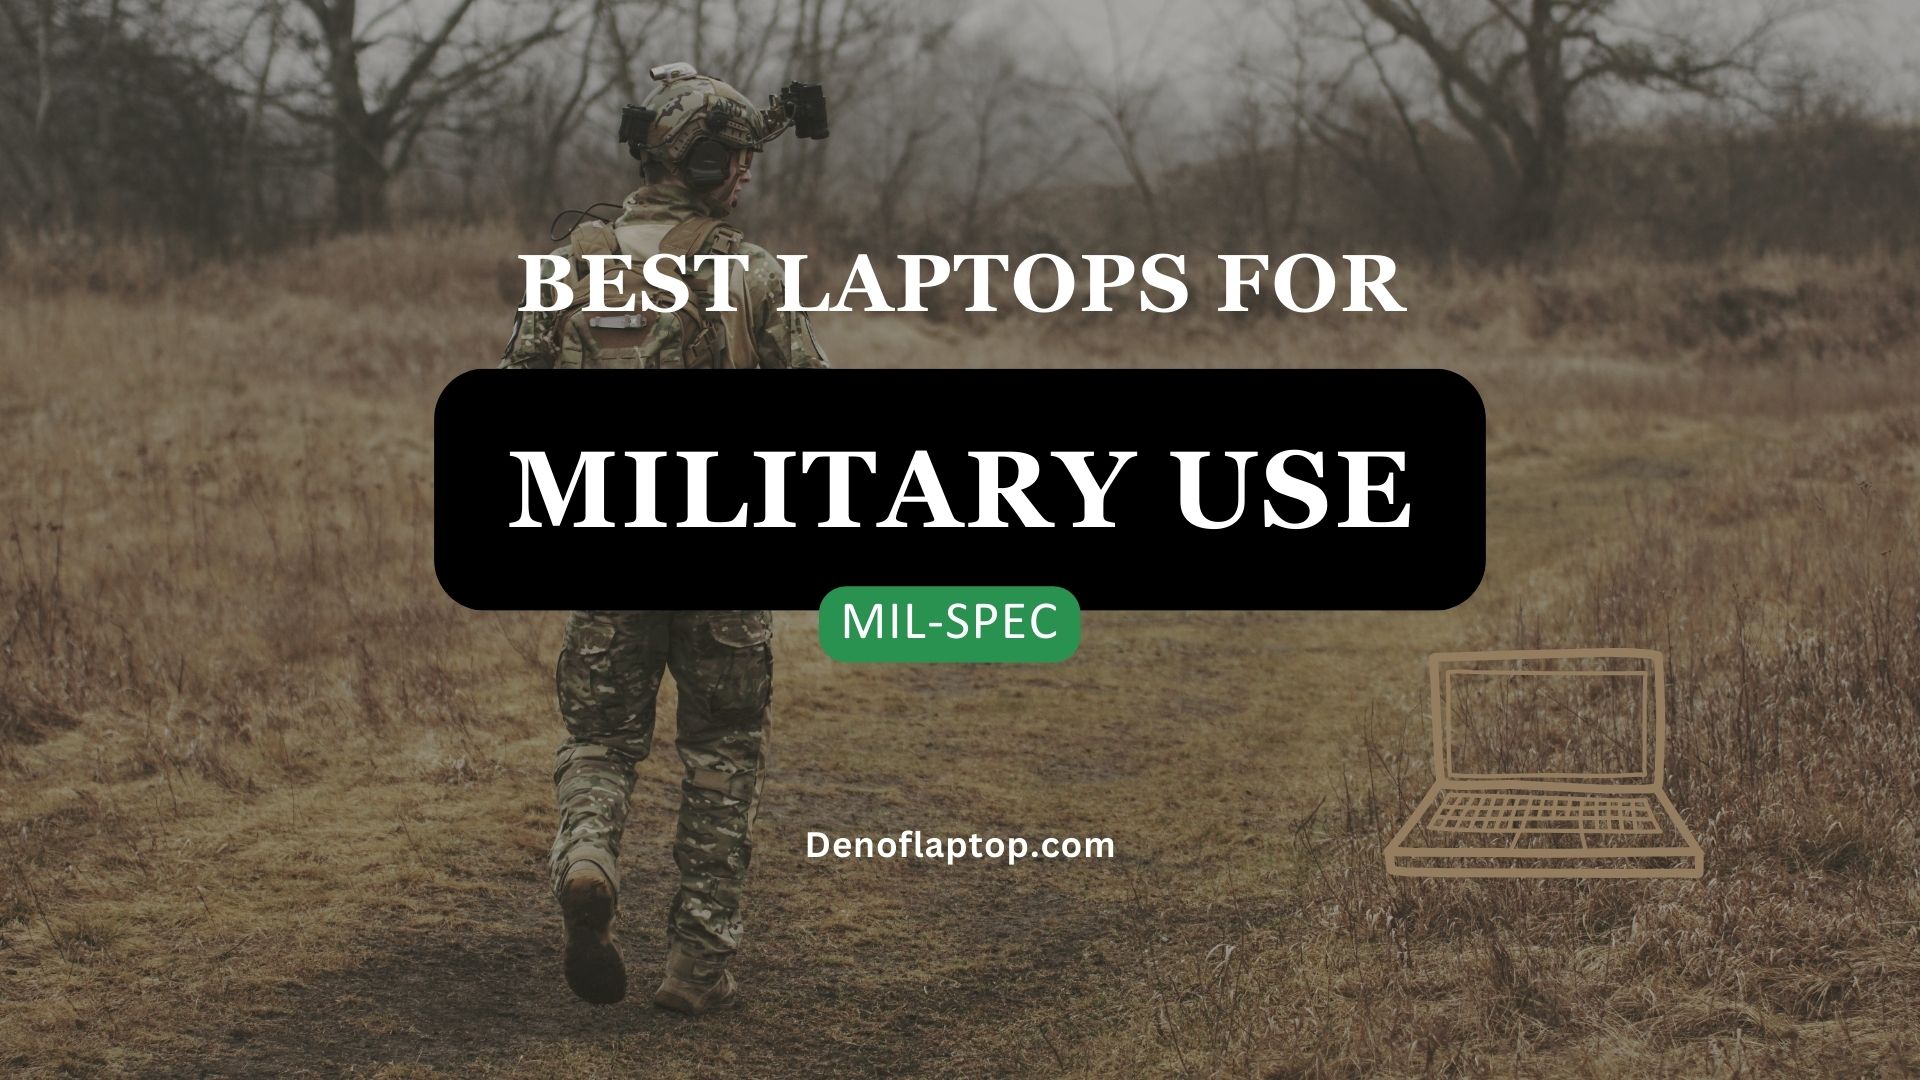 Best laptops for military Use